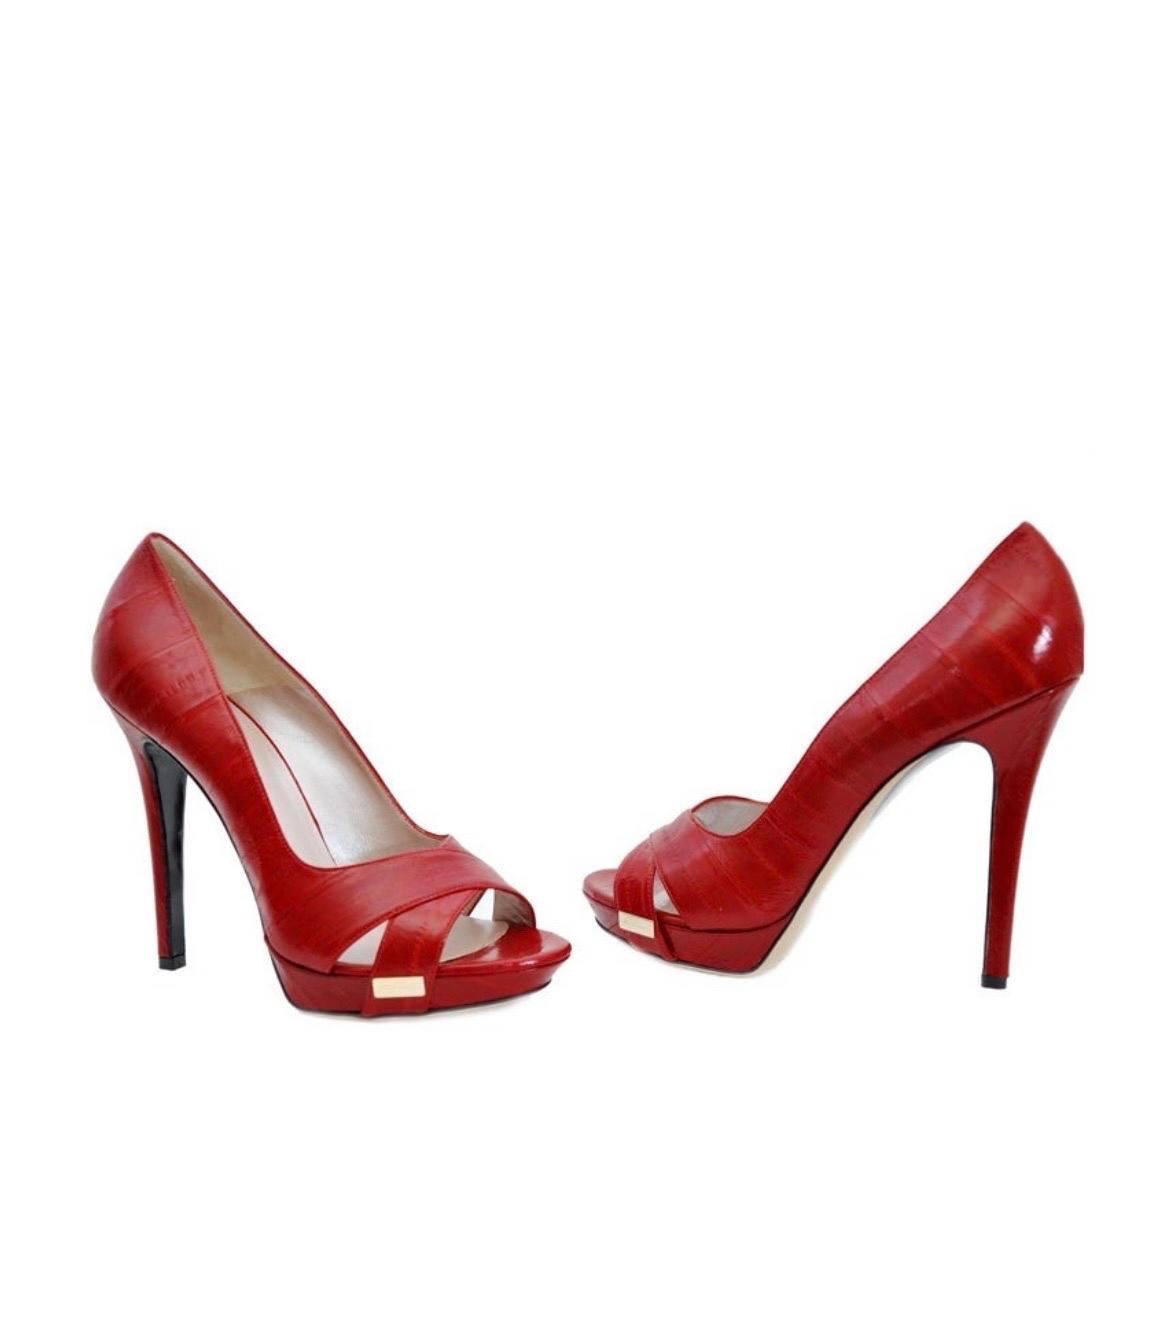 S/S 2002 Vintage Versace Red Eel Skin Platform Shoes  40 -10 NWT In New Condition For Sale In Montgomery, TX